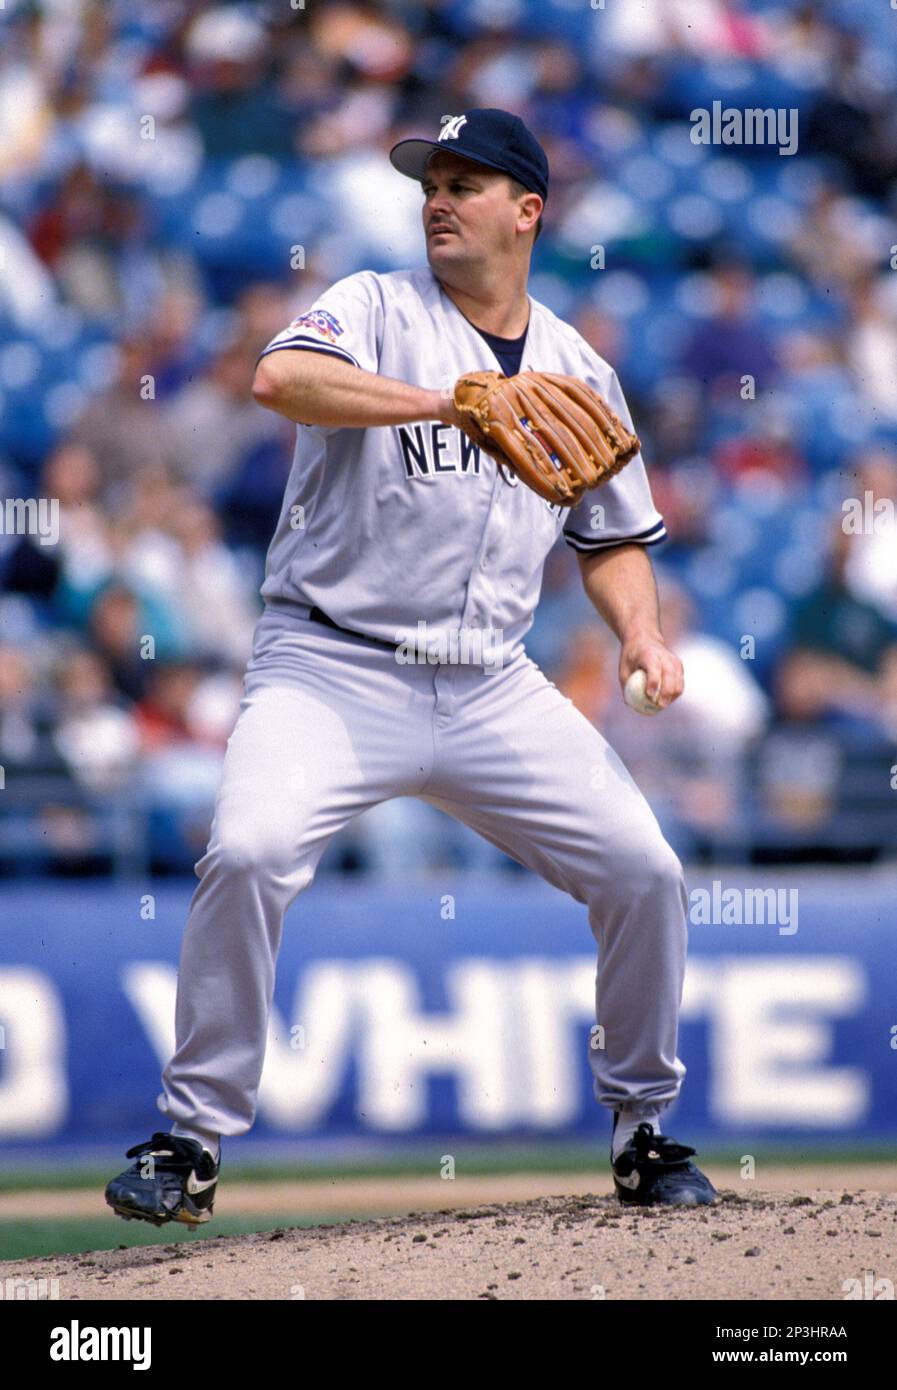 New York Yankees David Wells (33) in action during a game from his